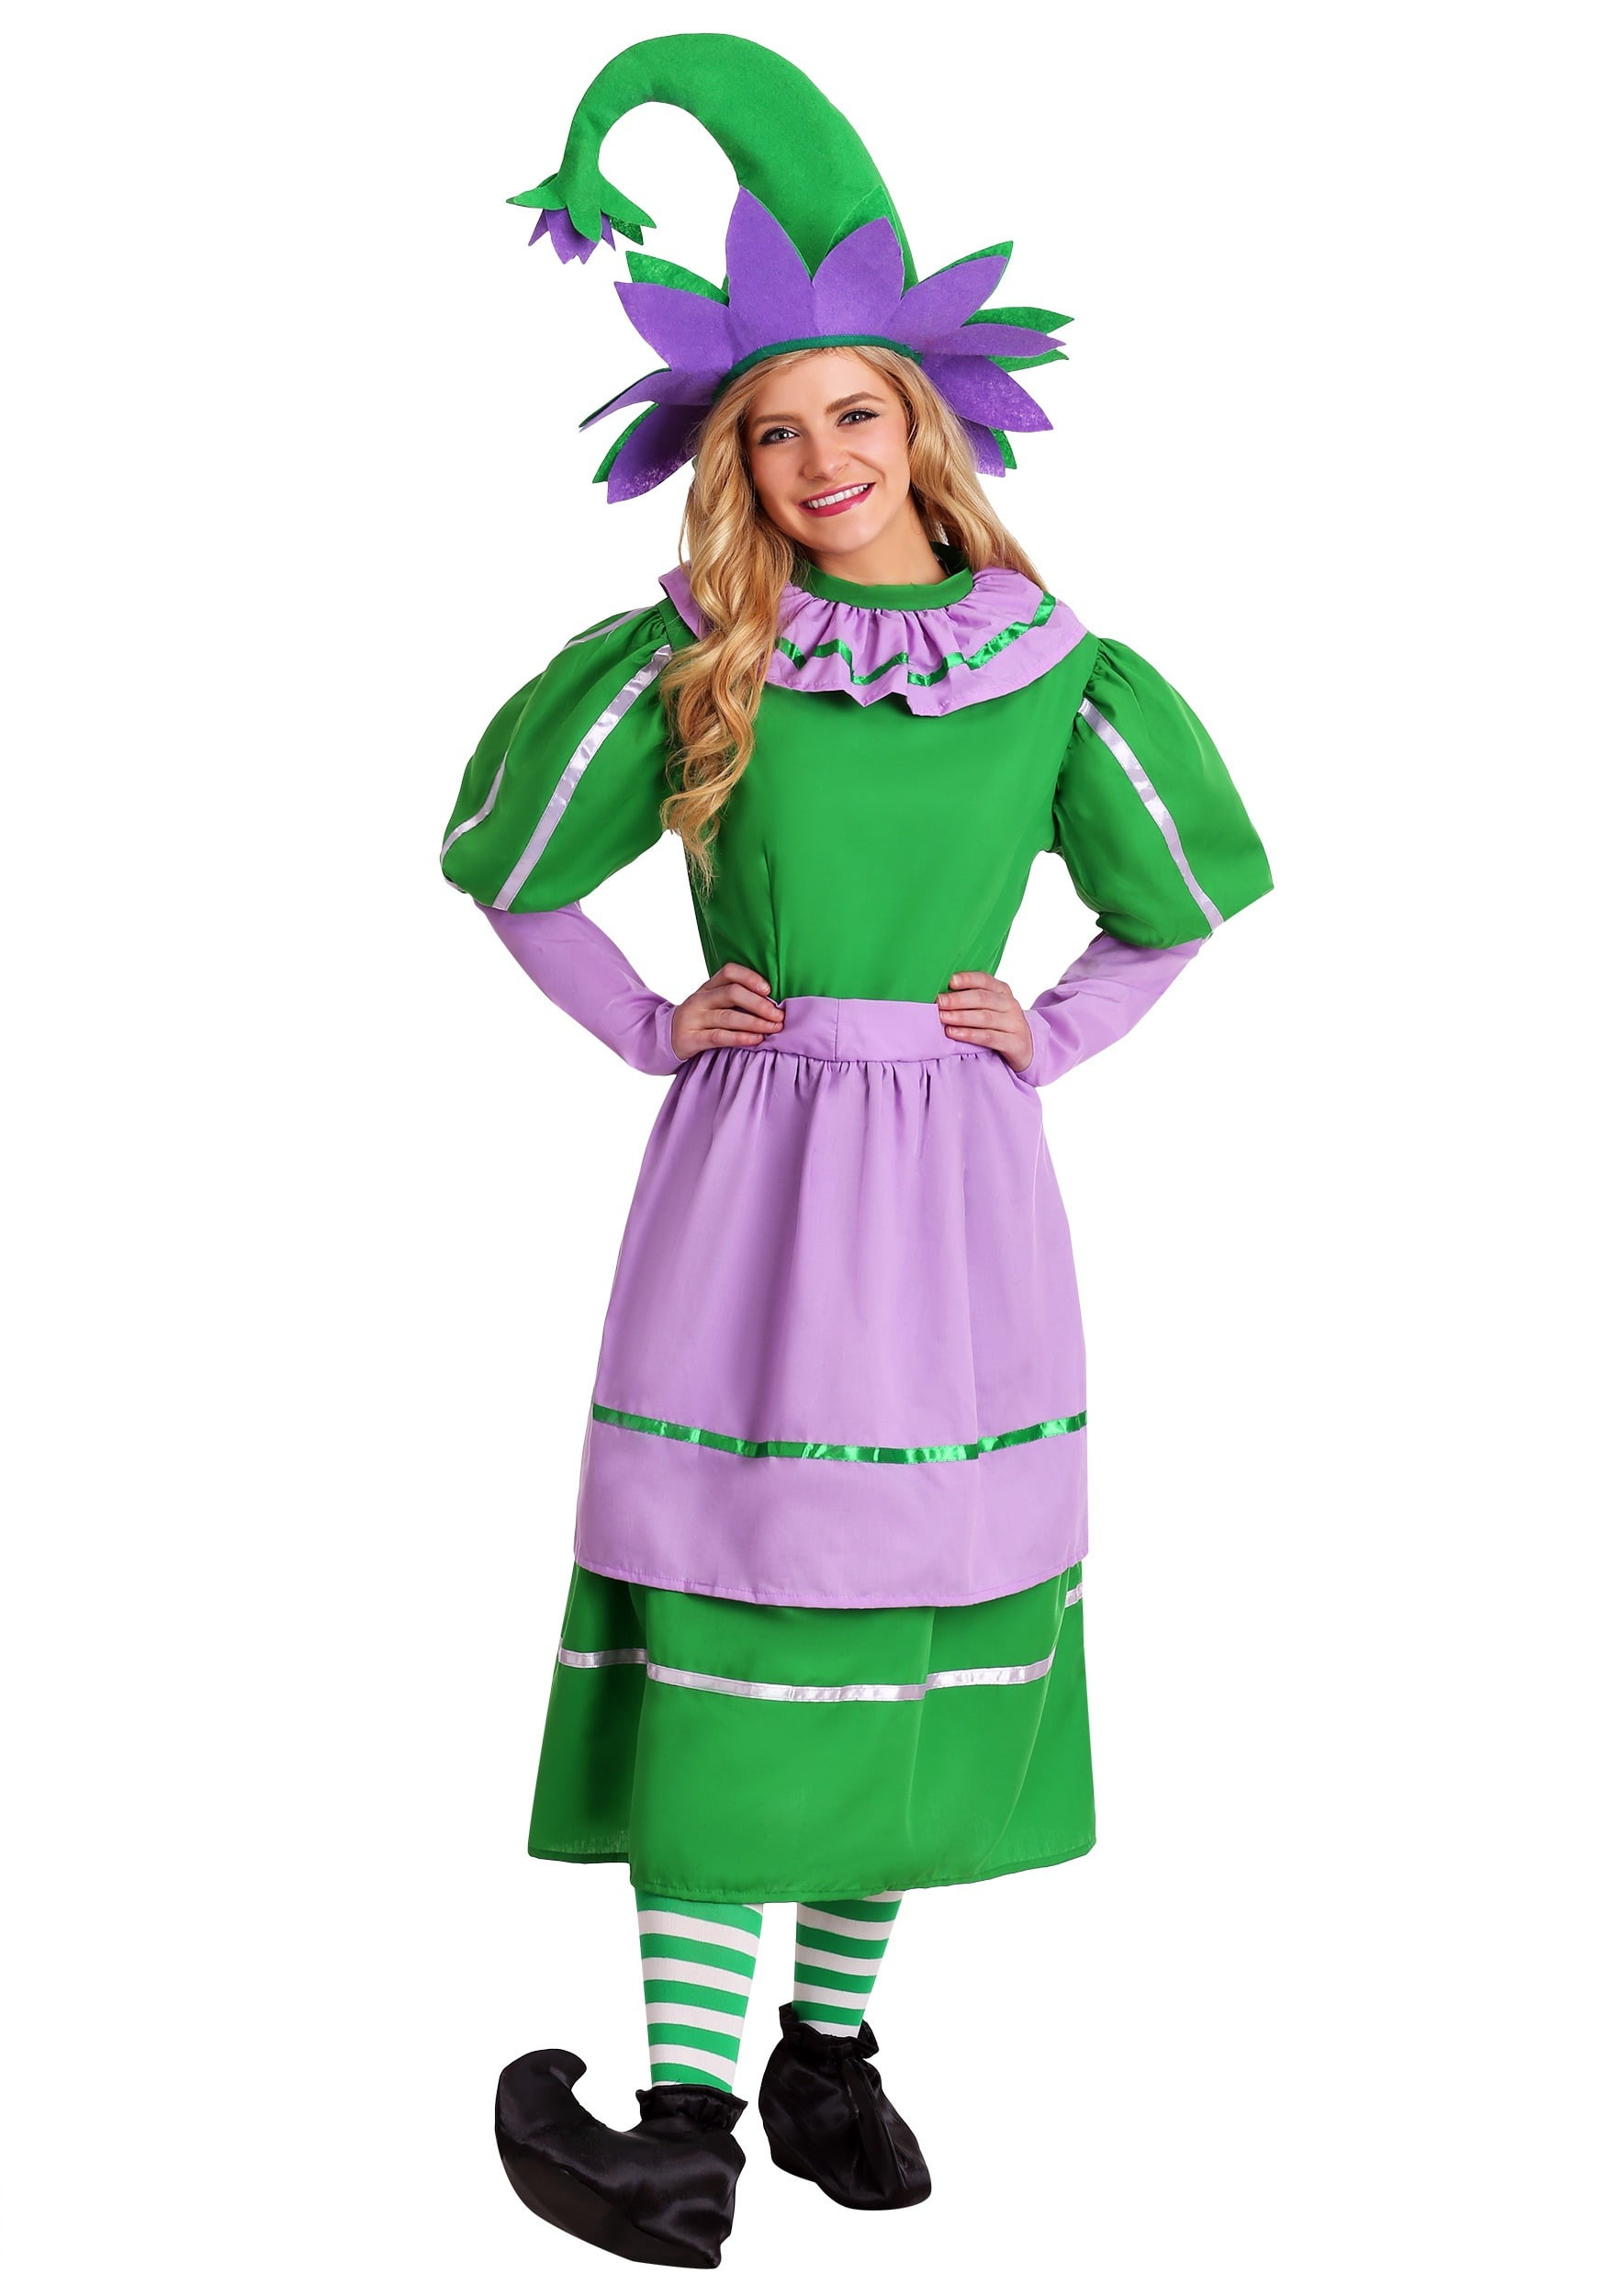 This is a Plus Size Munchkin Girl Costume.